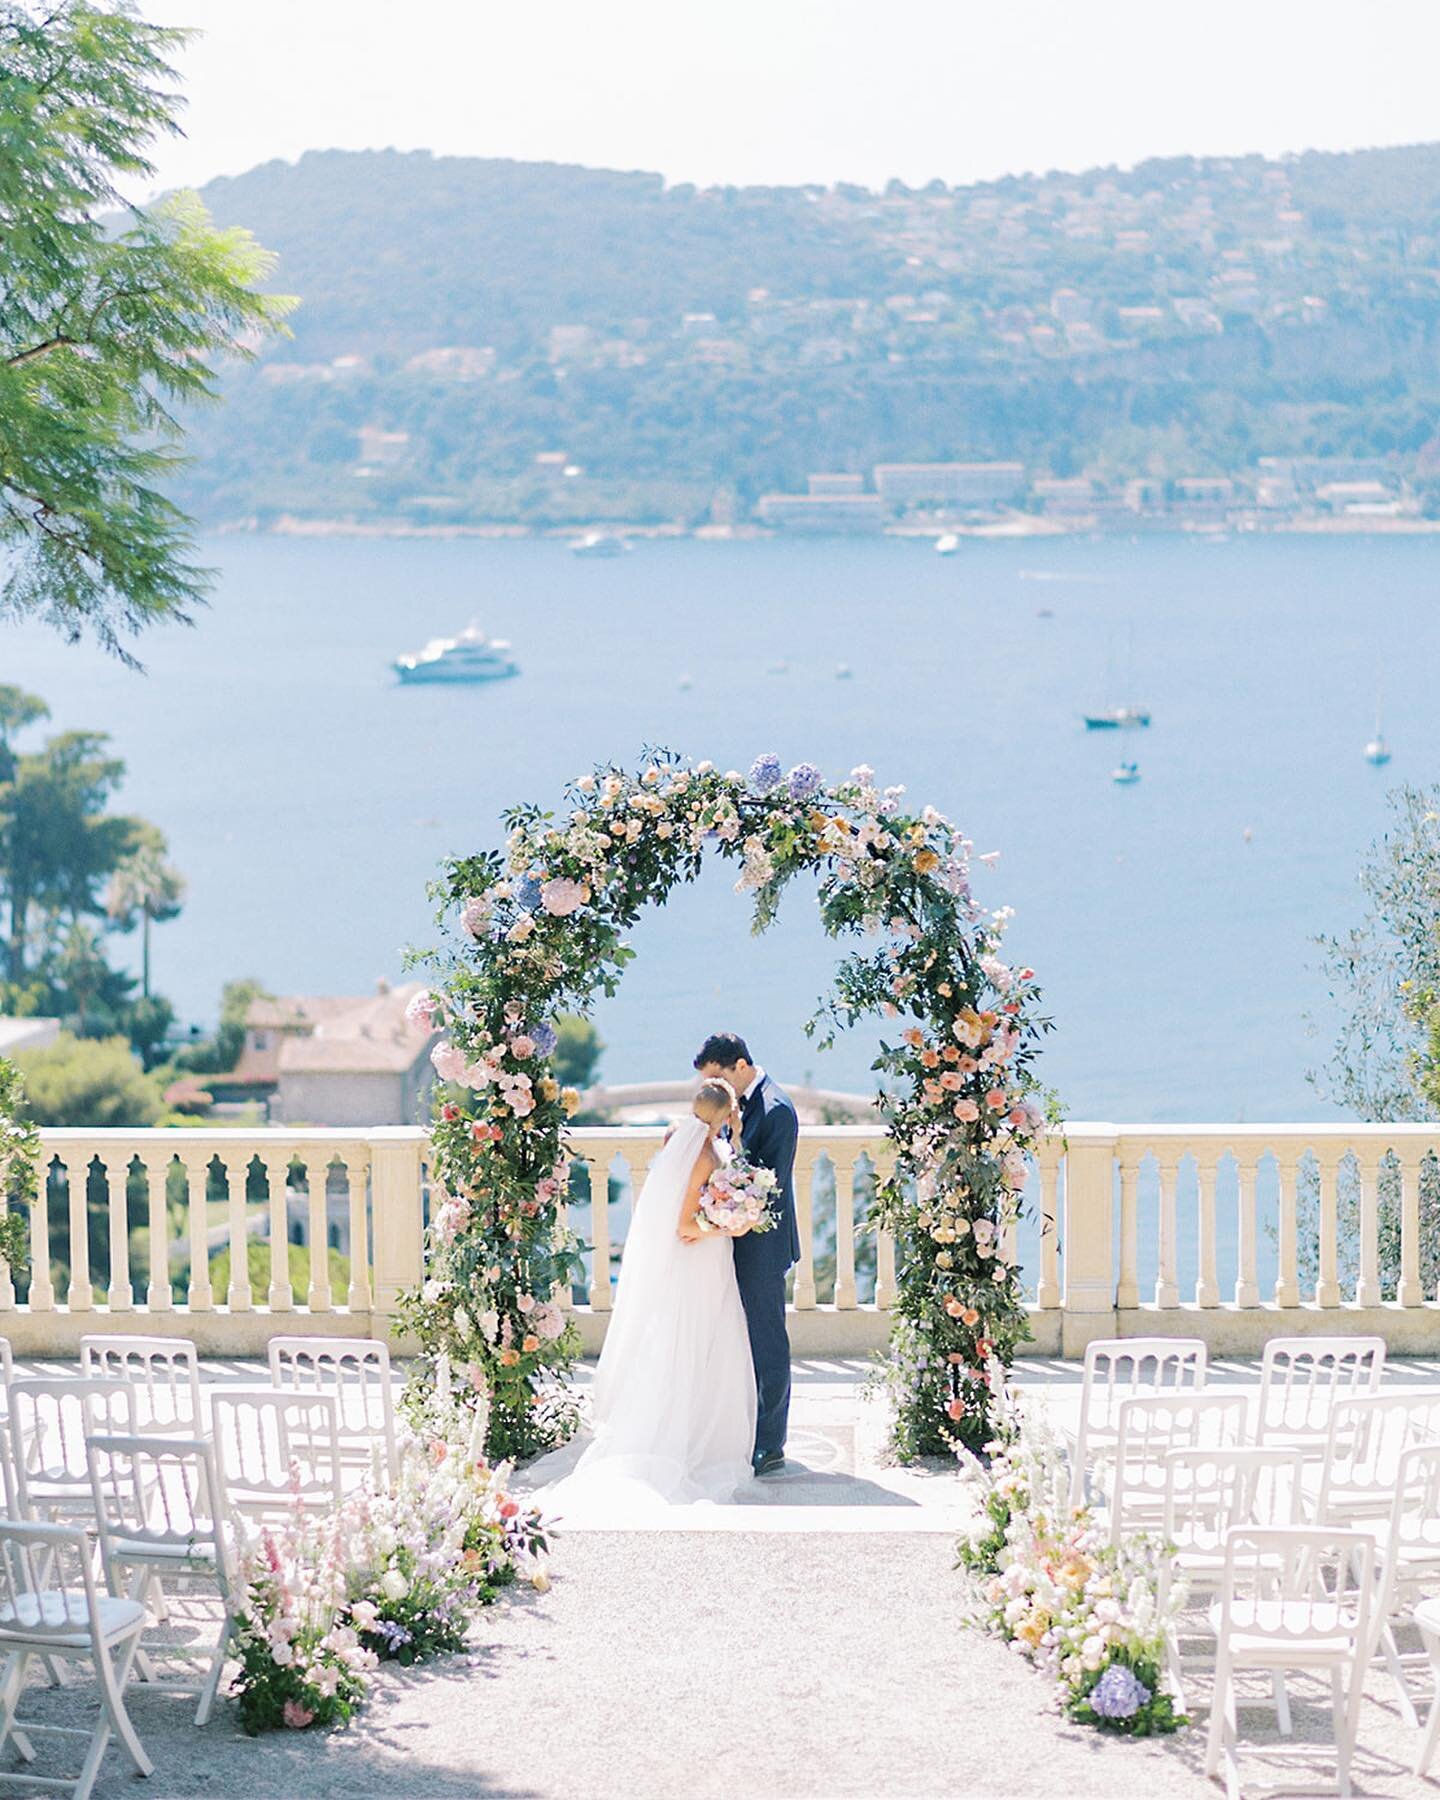 A picture perfect summer wedding in France at the stunning Villa Ephrussi! ✨ Gearing up for a beautiful fall season ahead with our one day shoot in DC as well as our Greece retreat to close out the year! We have been super busy with real weddings the